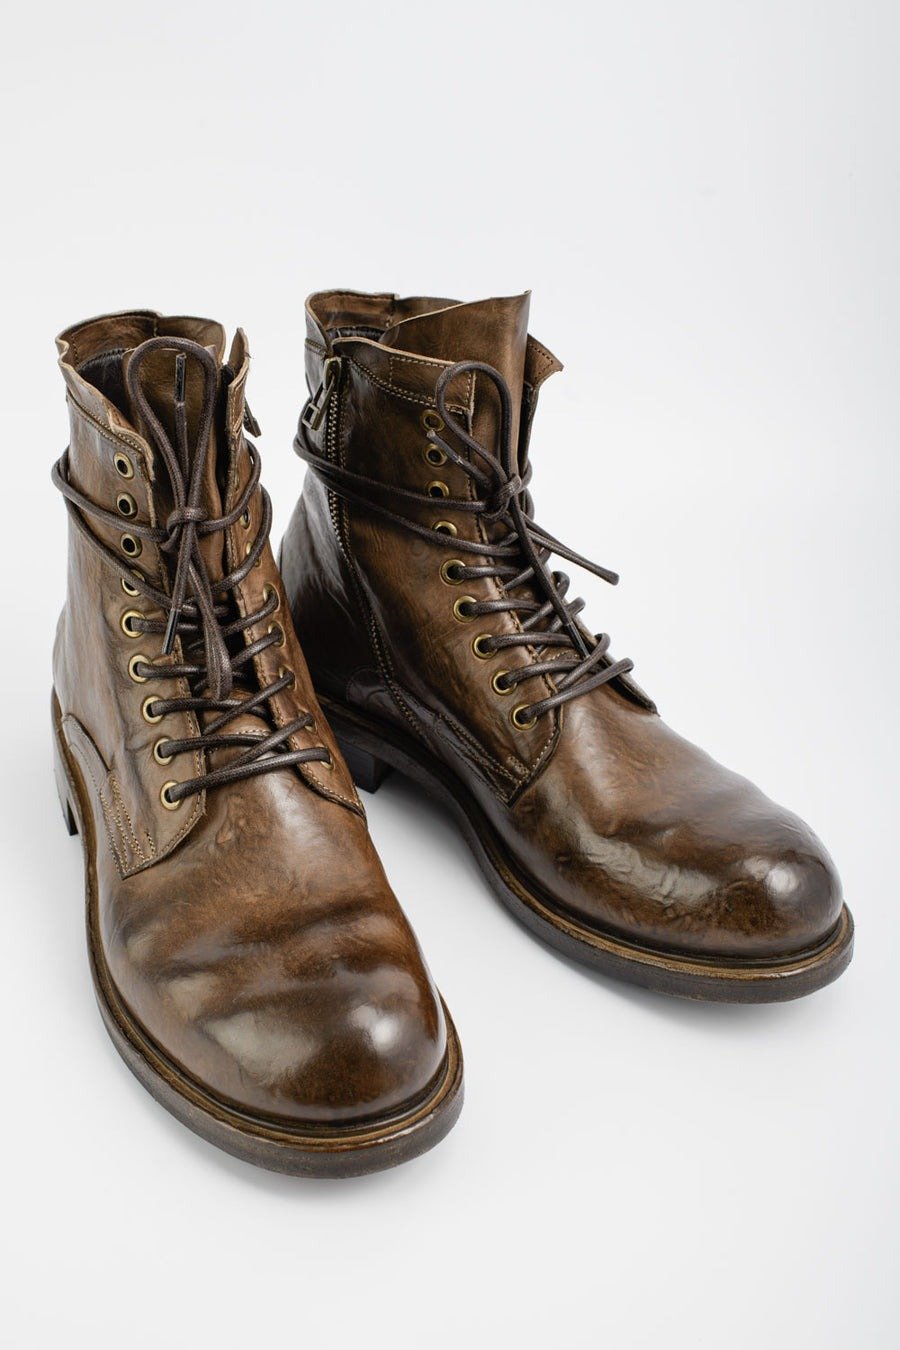 CURZON husk-brown military boots